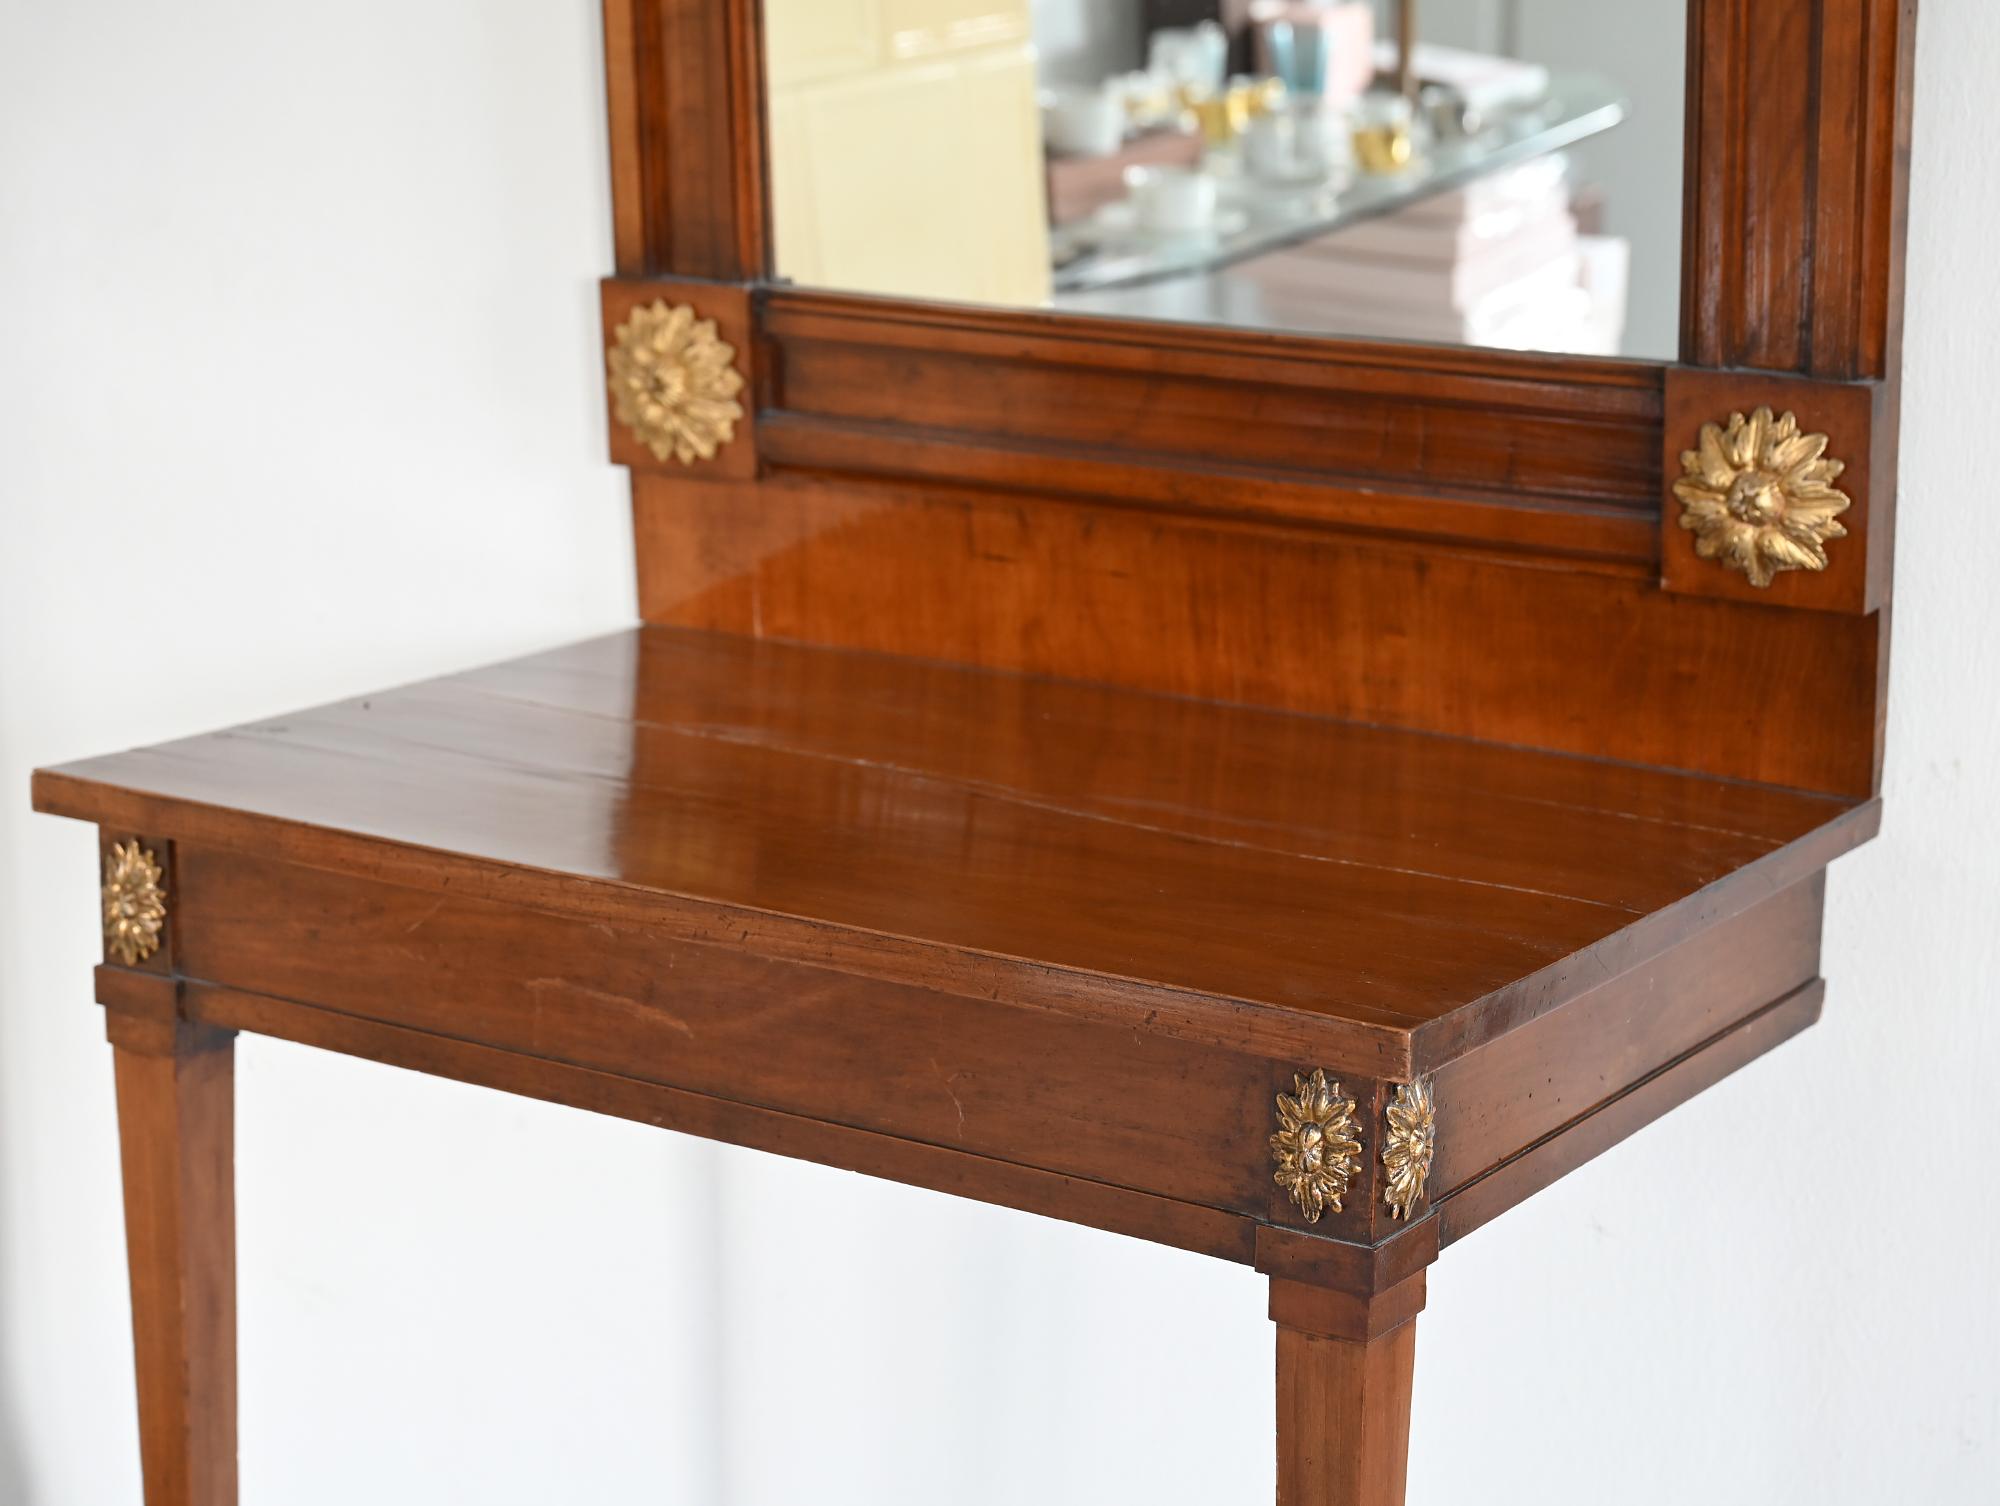 Empire 19th Century Console Table with Mirror circa 1810, South German cherrywood